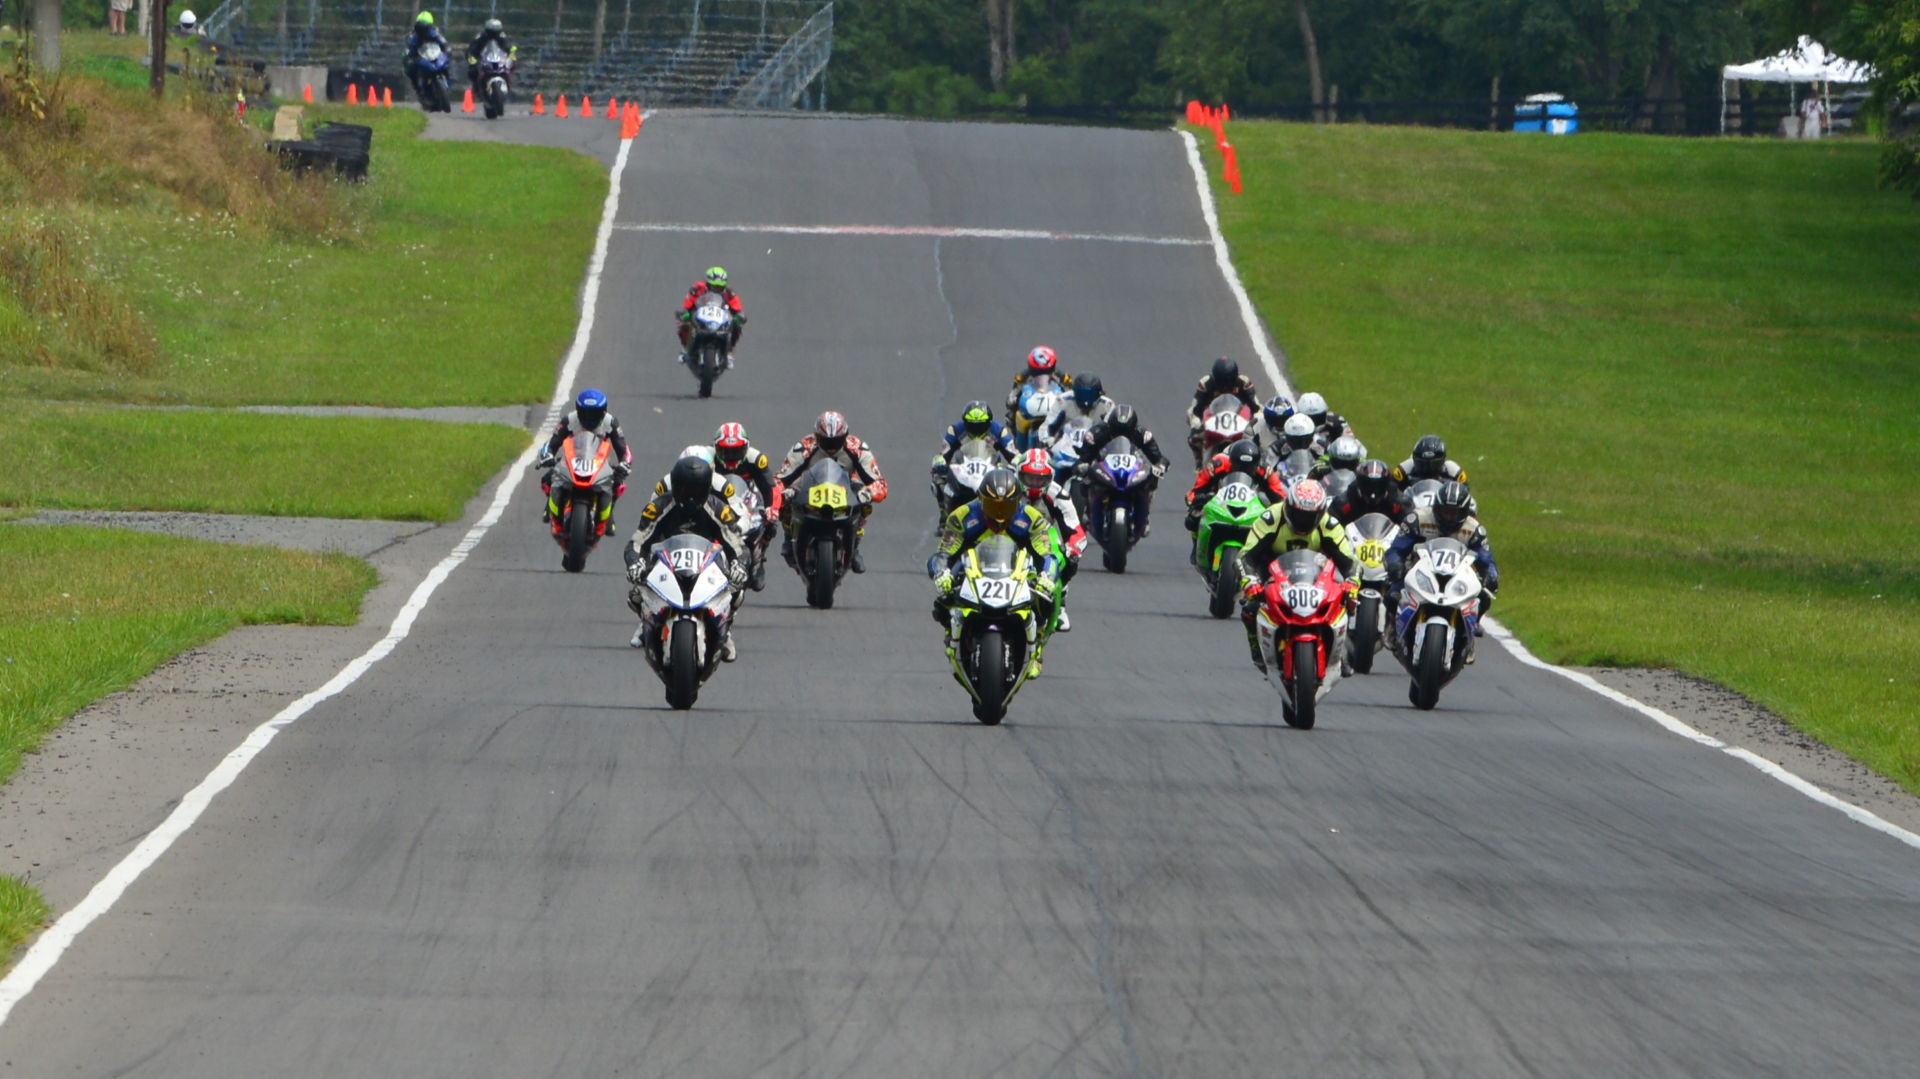 Ejendommelige Fremmedgørelse grill ASRA Team Challenge: Washed Up Racing Wins At Summit Point - Roadracing  World Magazine | Motorcycle Riding, Racing & Tech News